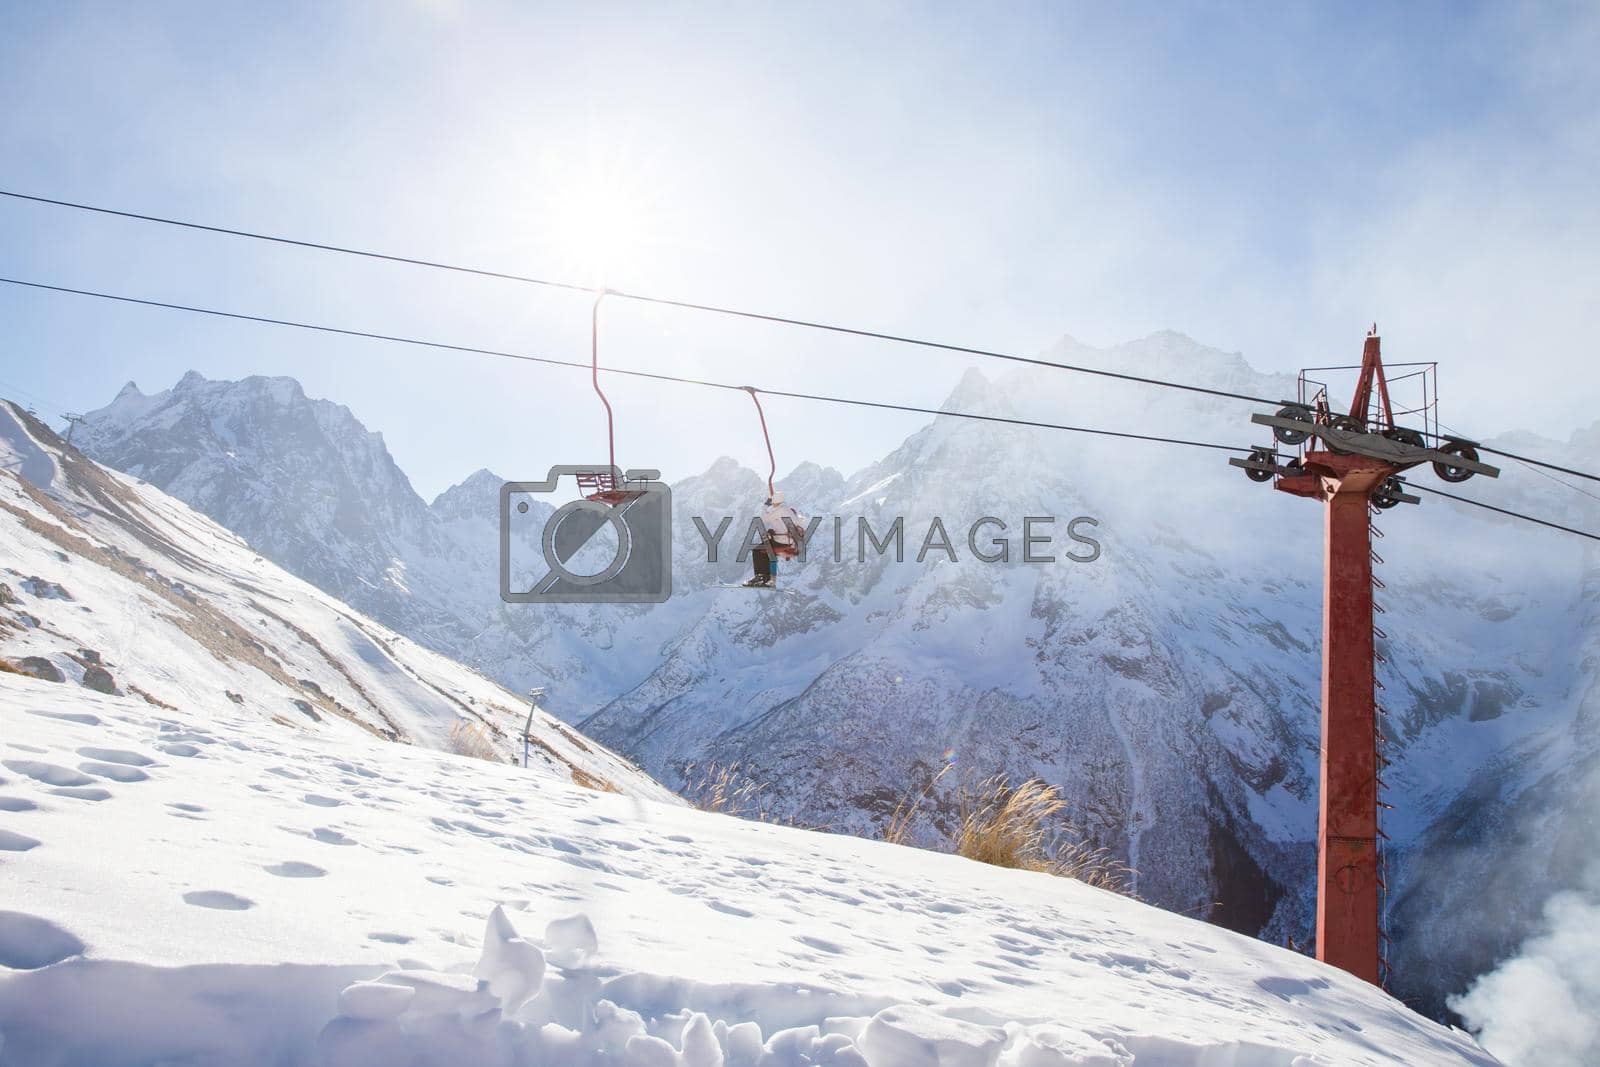 People are lifting on ski lift in the mountains